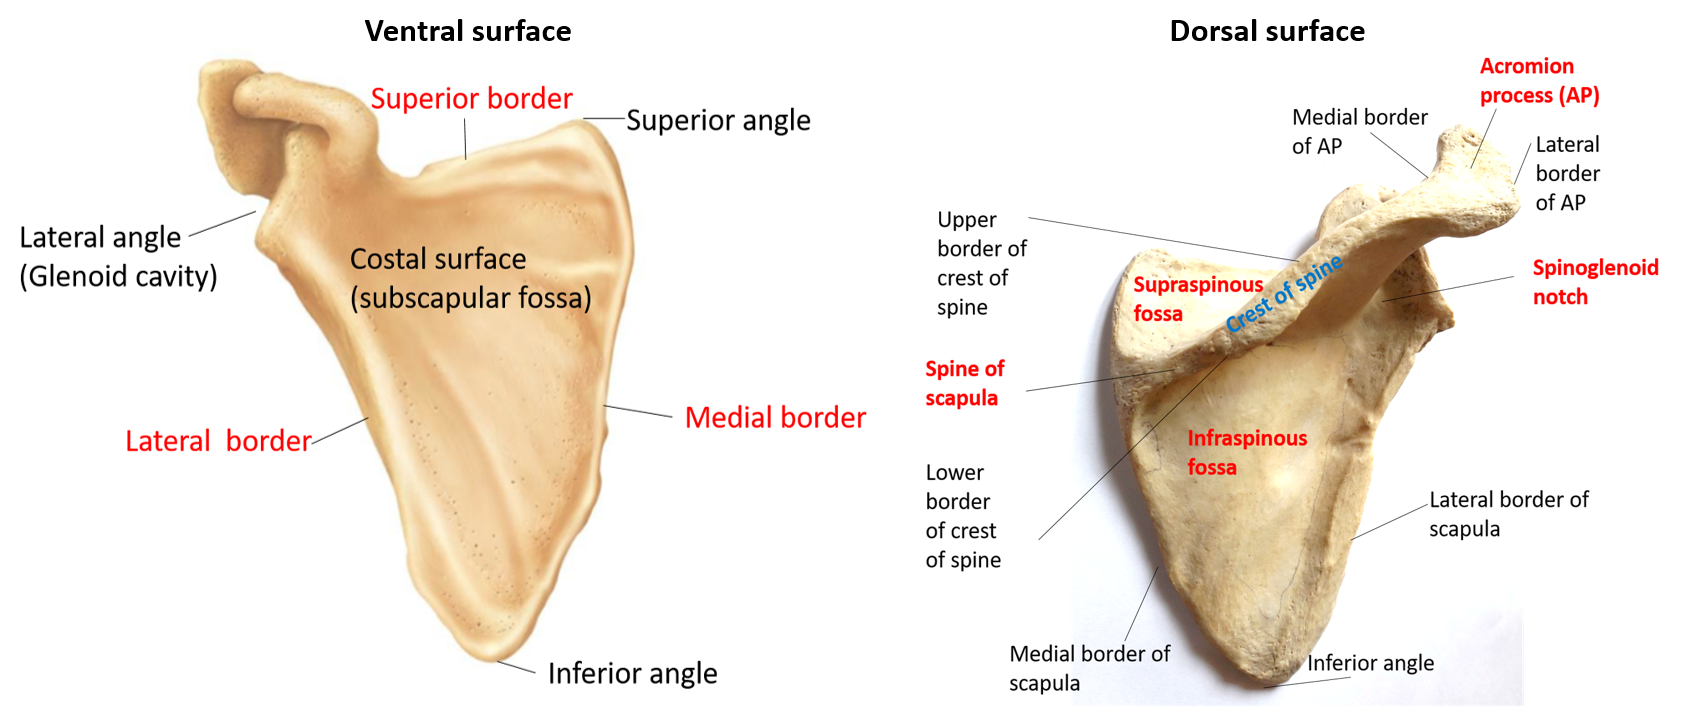 scapula - ventral and dorsal surfaces